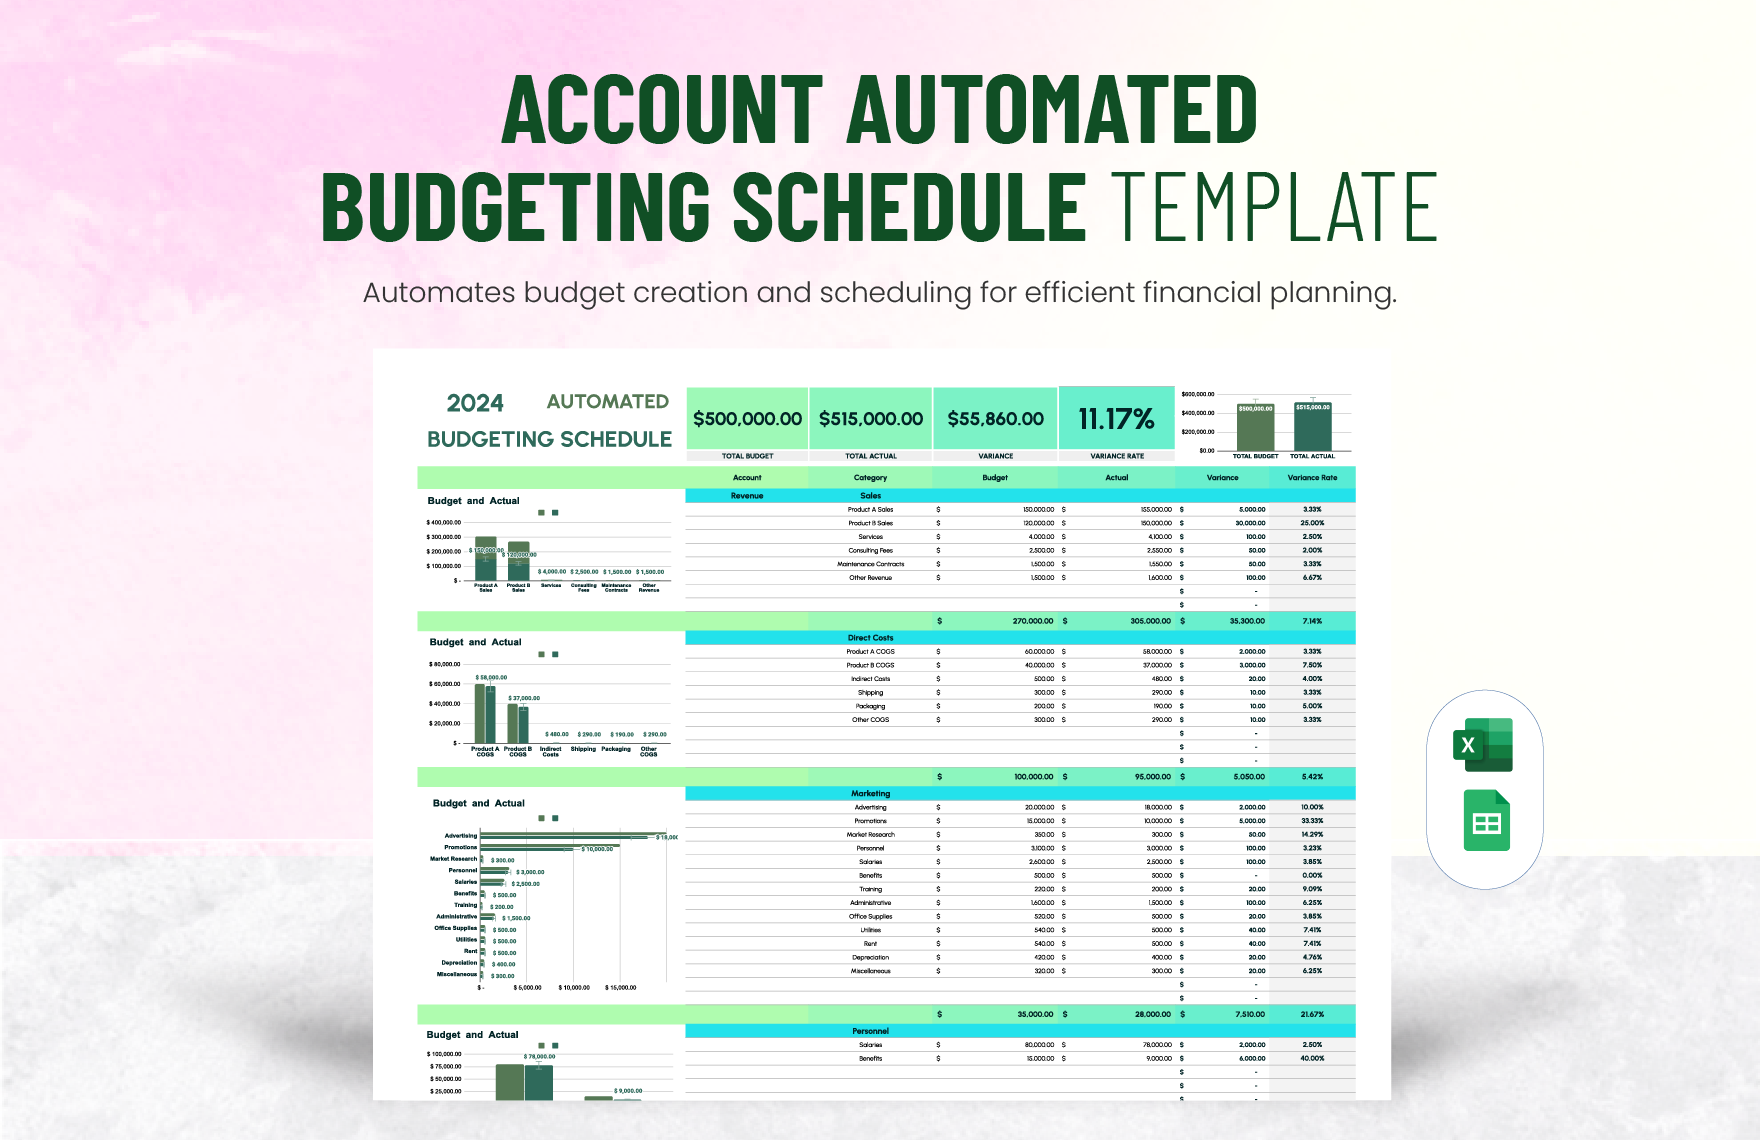 Account Automated Budgeting Schedule Template in Excel, Google Sheets